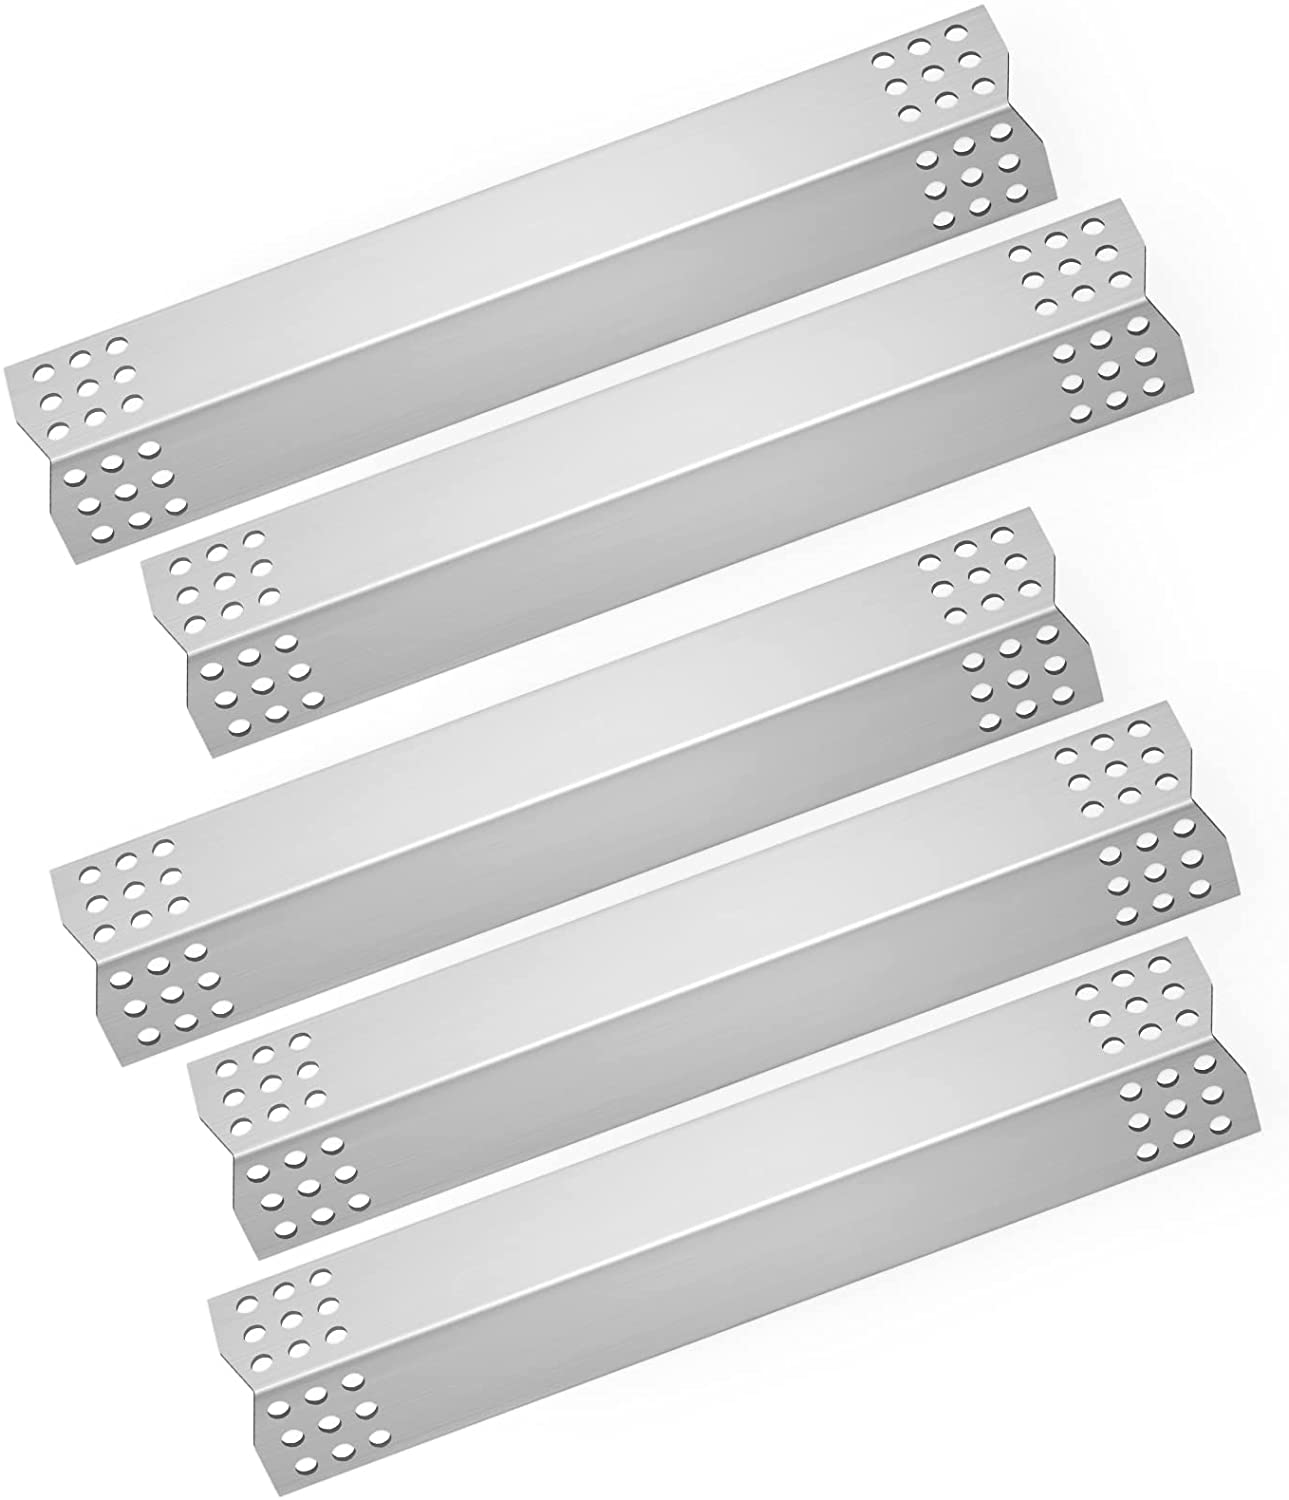 Grill Heat Plates Stainless Steel 5pcs For Kitchen Aid Jenn-Air Outdoor Gourmet